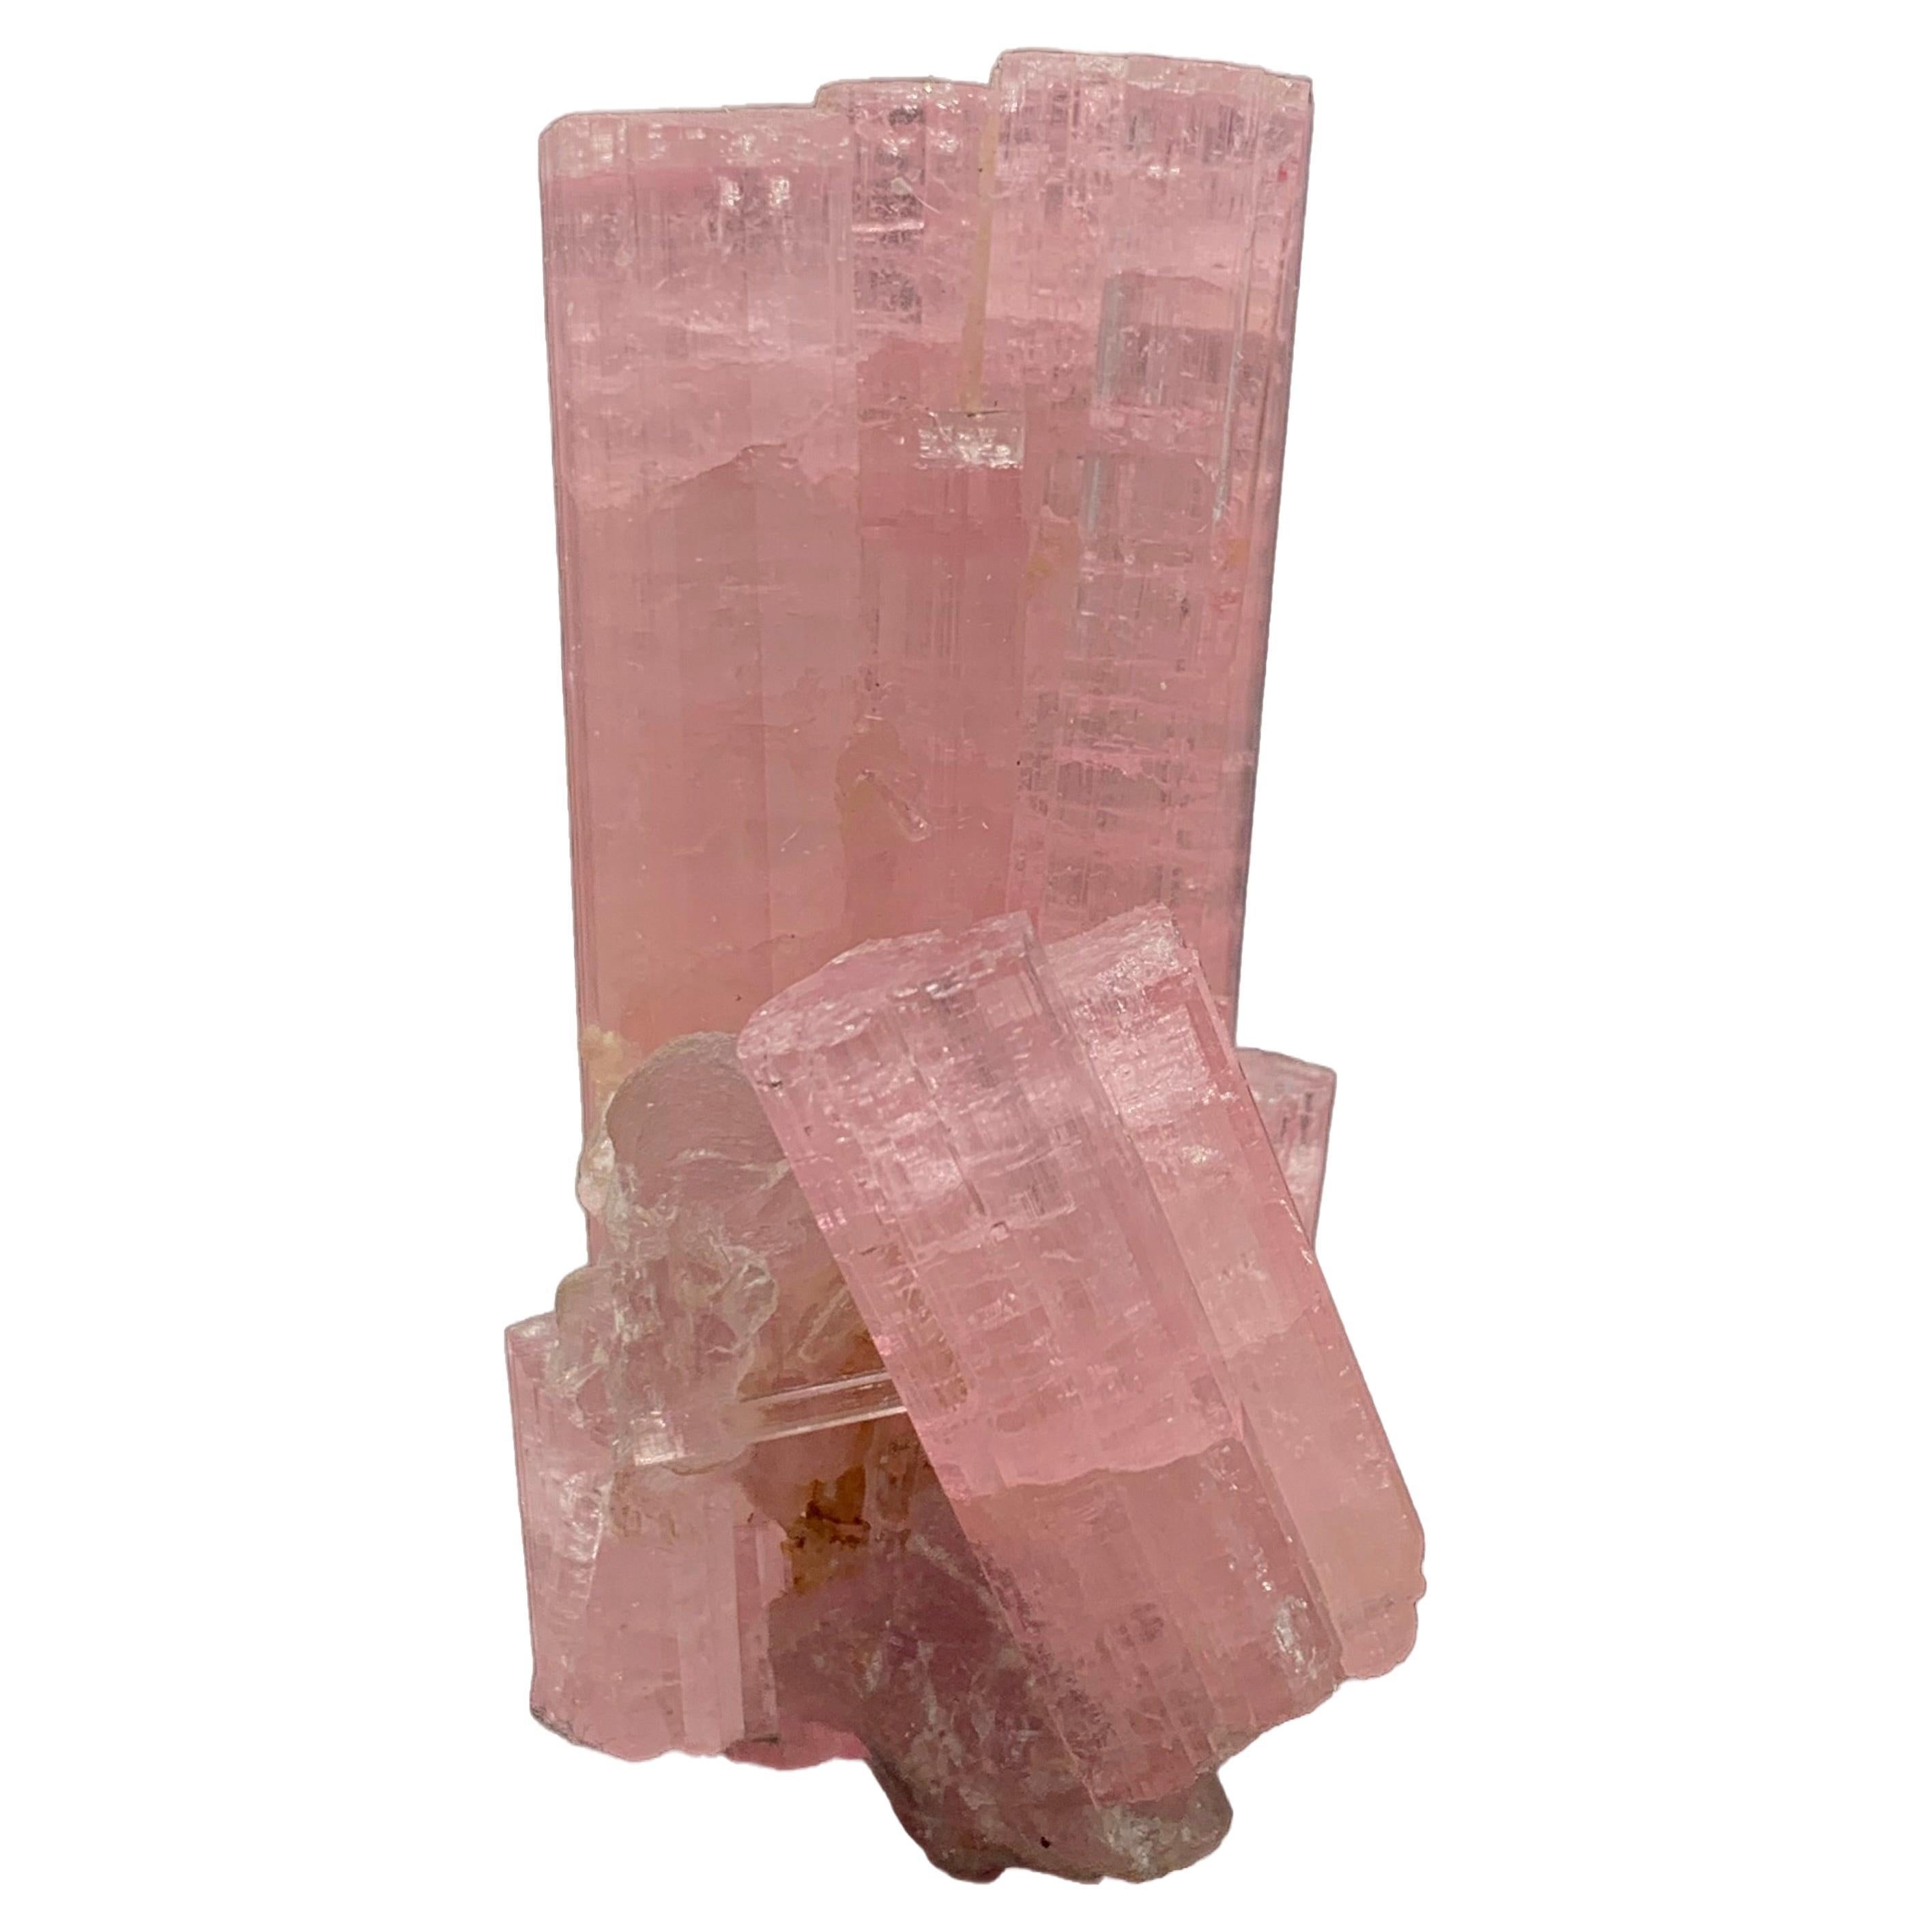 63.27 Gram Pretty Pink Tourmaline Crystal Bunch From Paprook Mine, Afghanistan 